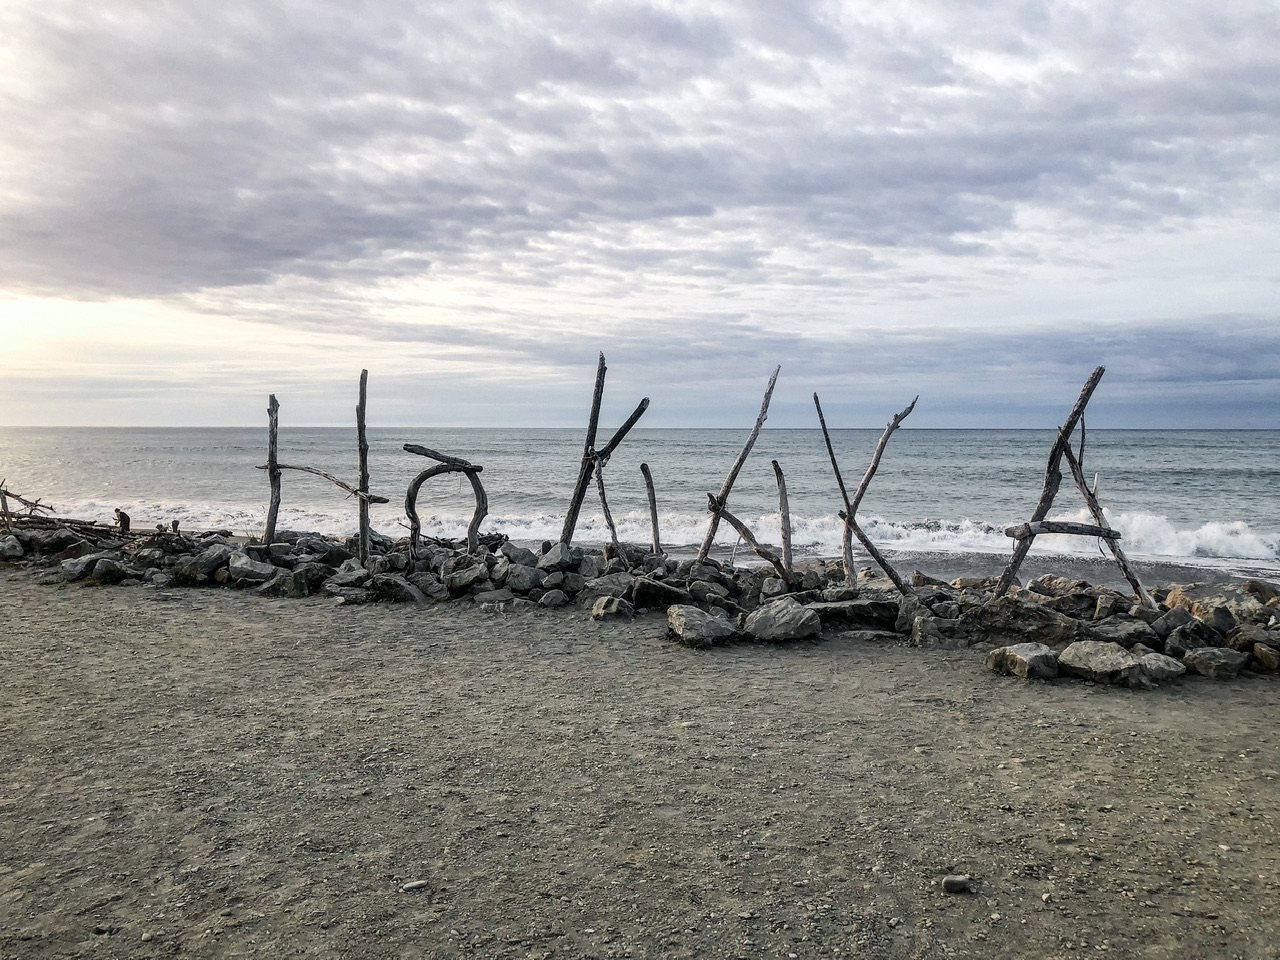 “Hokitika” spelt out in driftwood standing vertically on a beach with ocean behind it